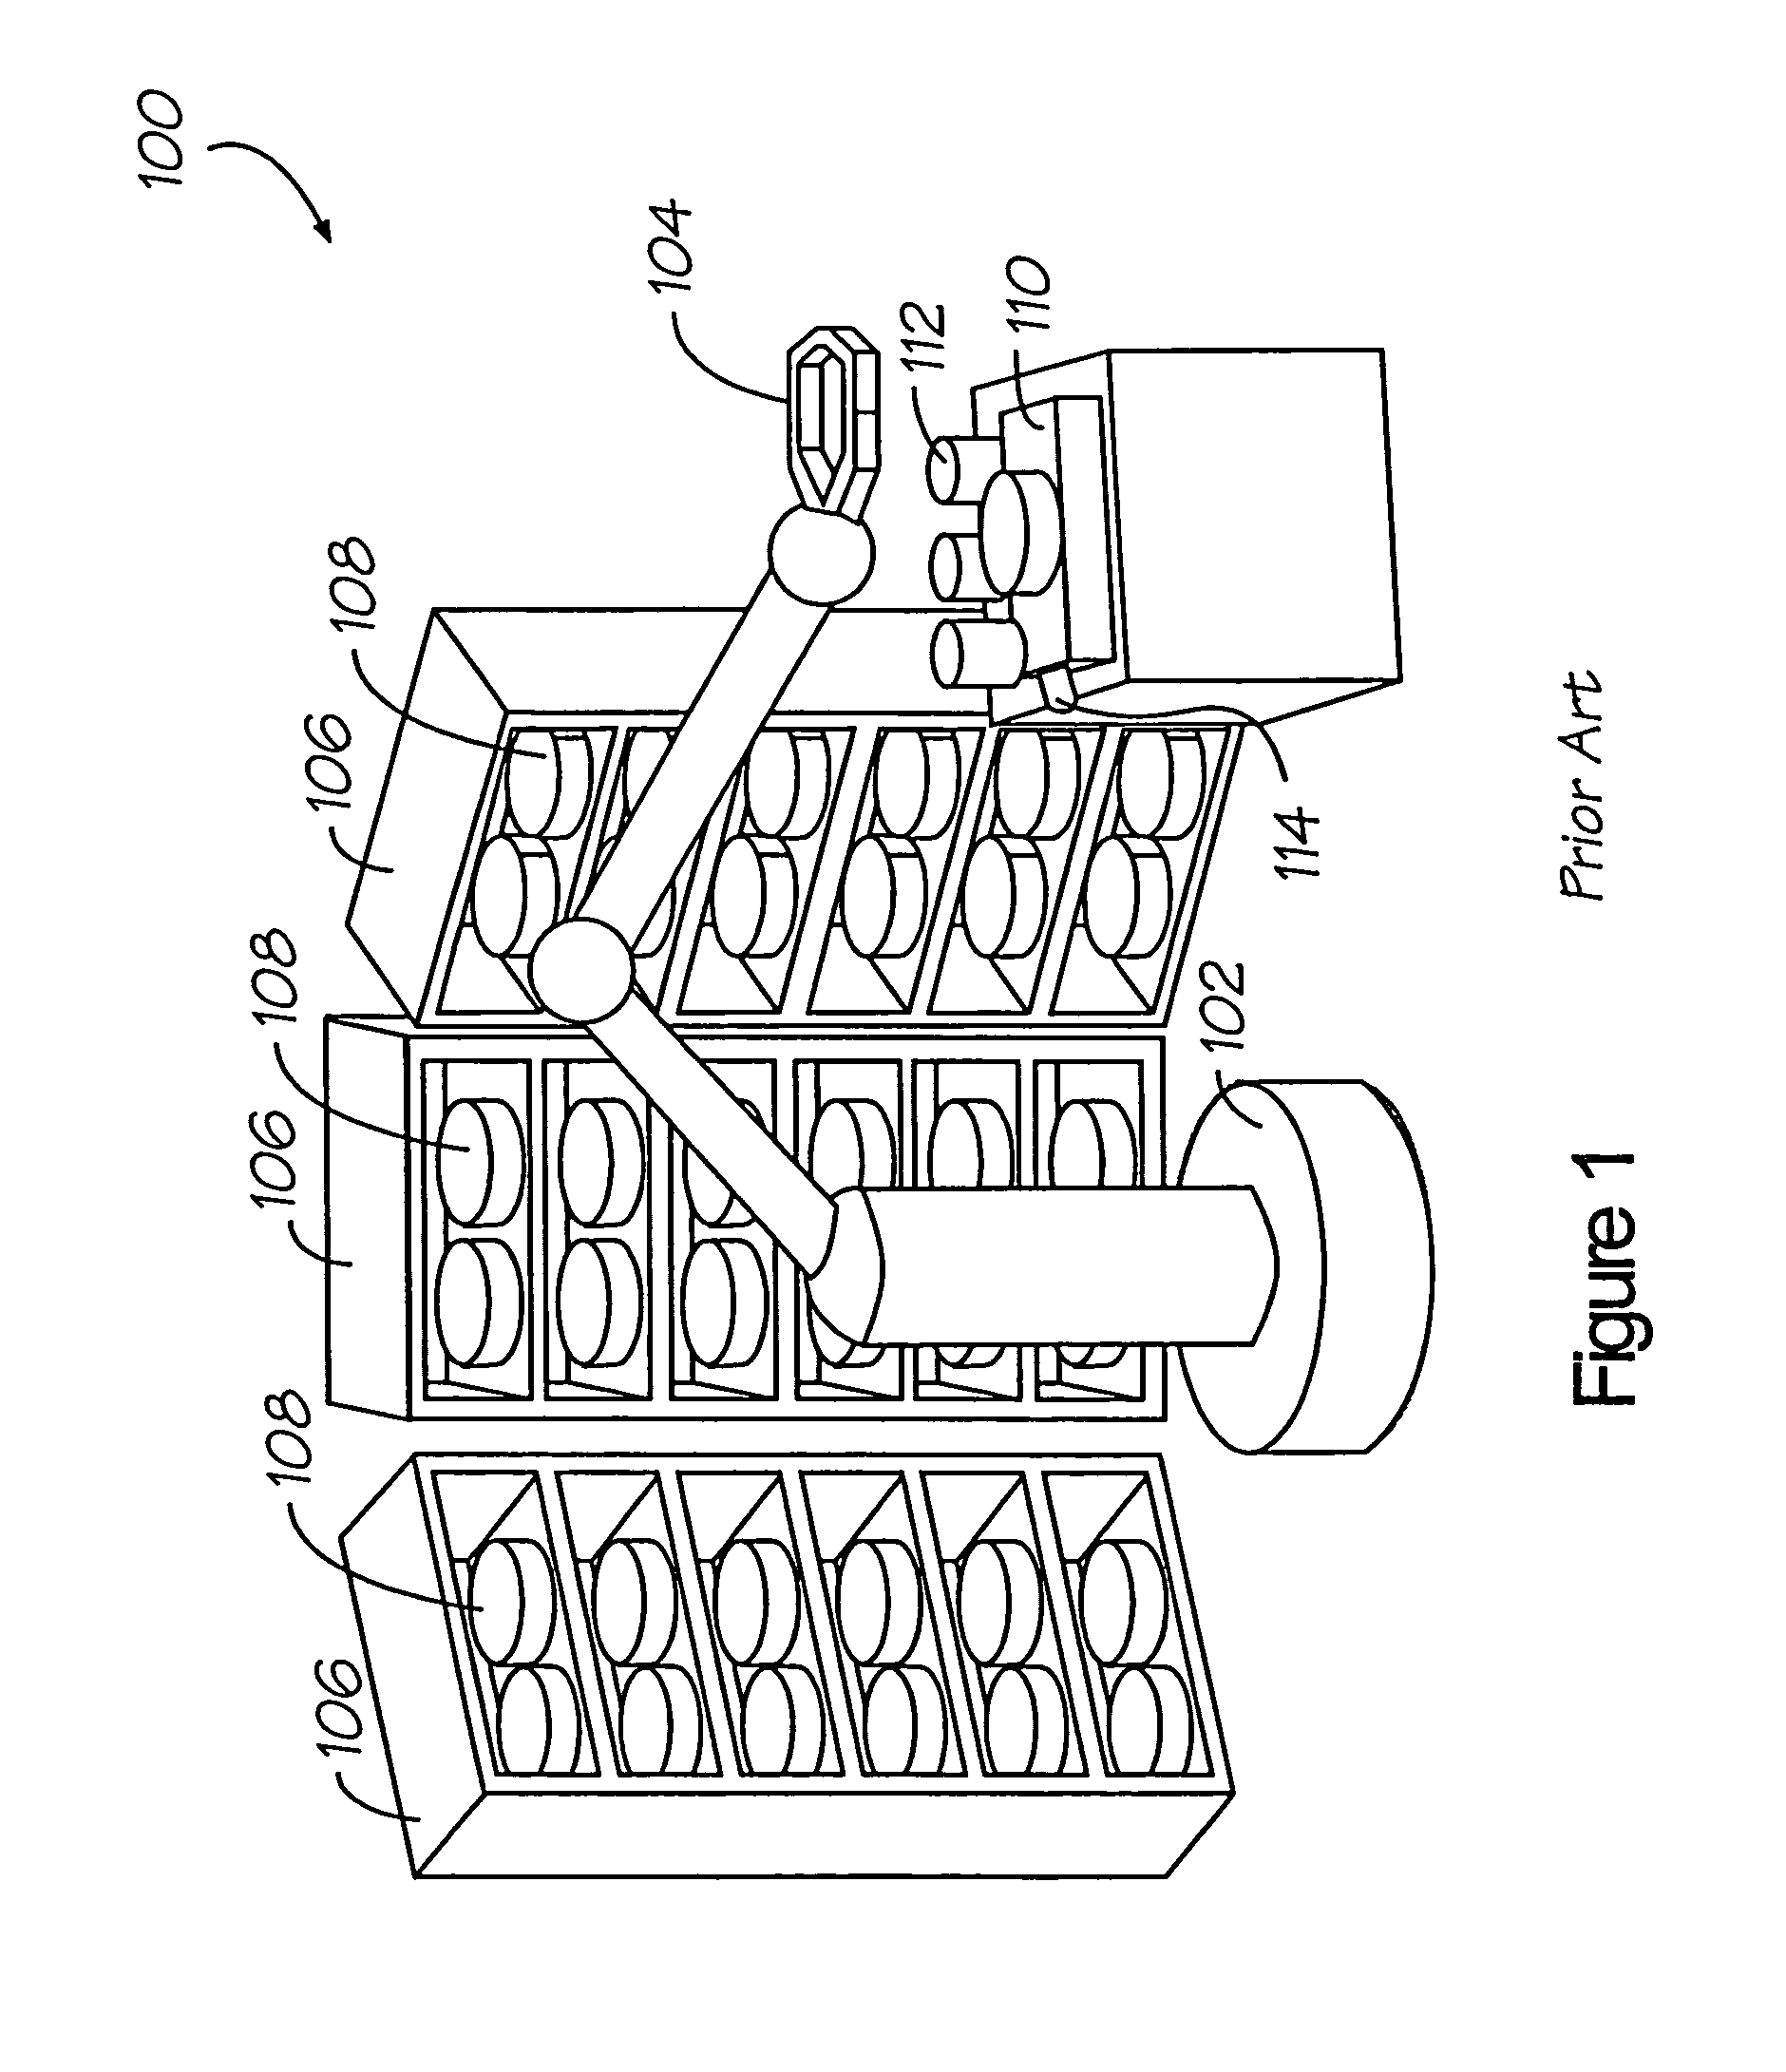 Robotic arm and method for using with an automatic pharmaceutical dispenser